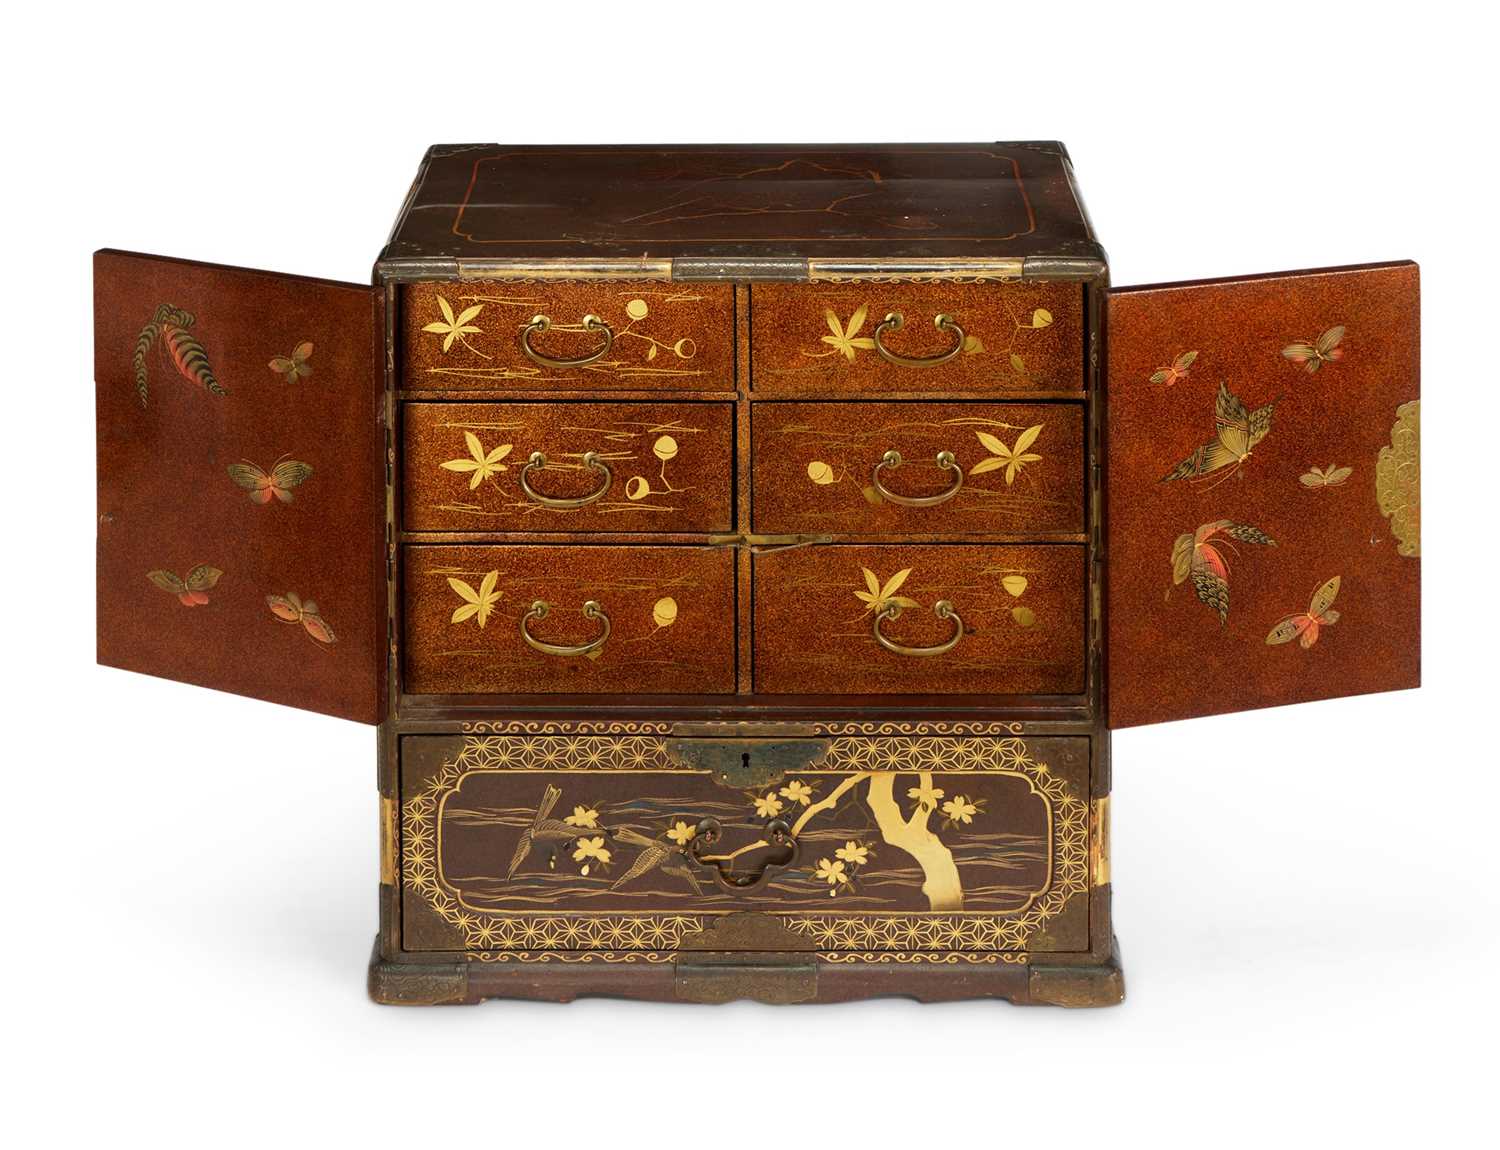 A LATE 19TH CENTURY JAPANESE GOLD LACQUERED TABLE CABINET CIRCA 1890